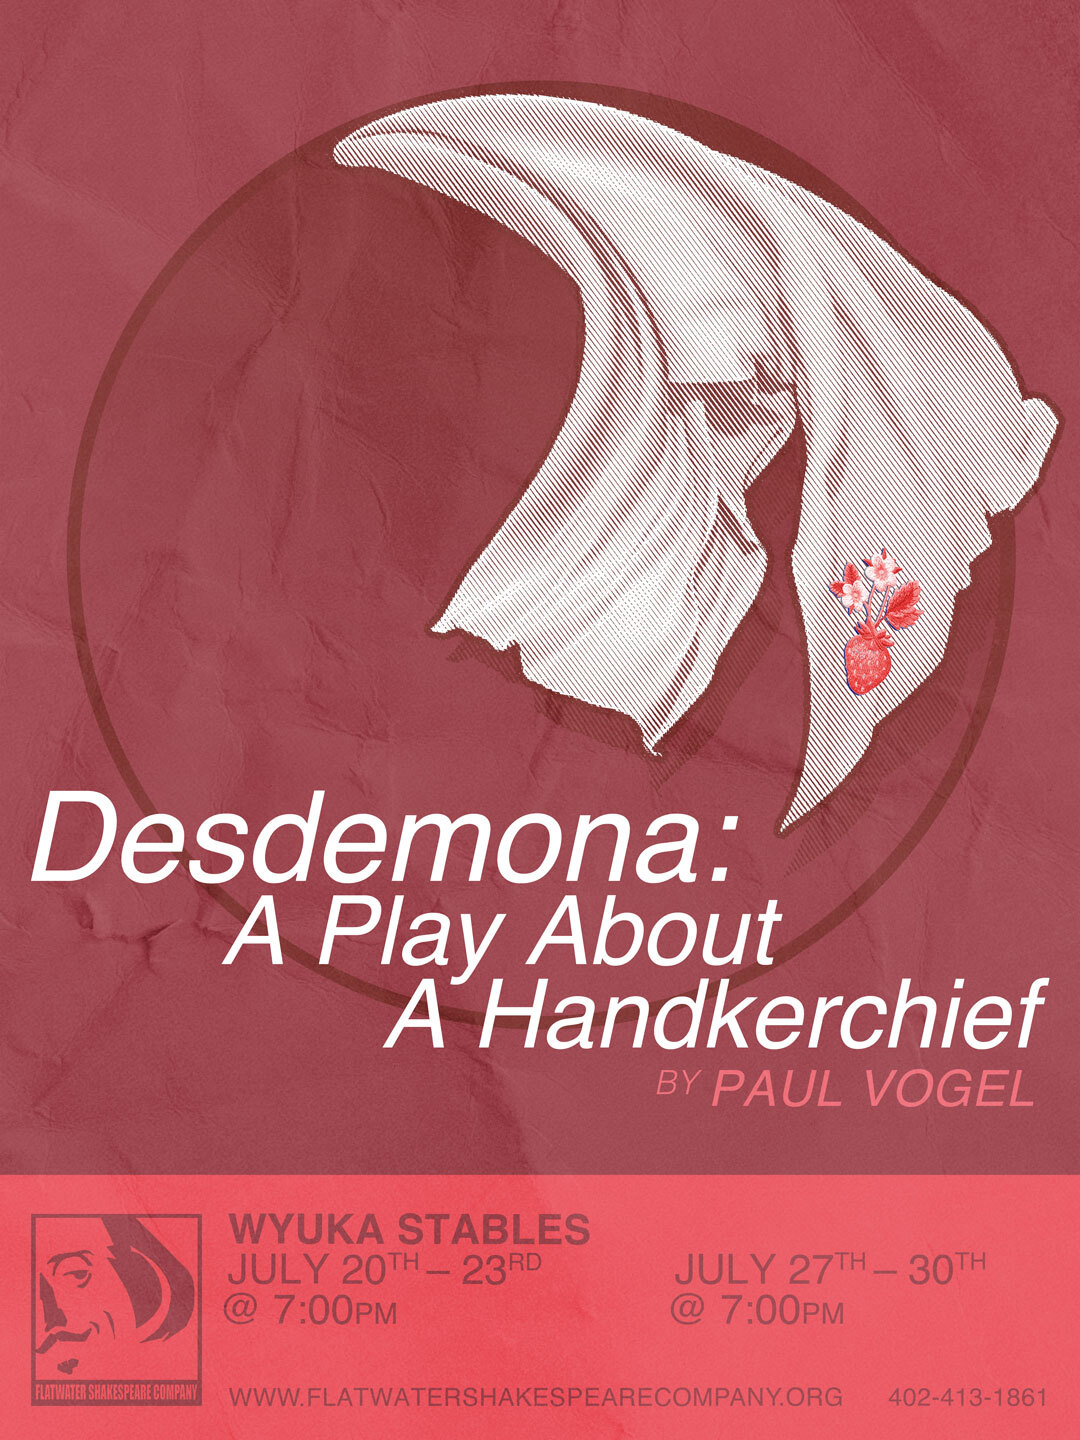 7/29 STU - STUDENT: Sat. July 29, 2023 | 7:00 p.m. - 10:00 p.m. CST | Wyuka Stables (Desdemona: A Play about a Handkerchief)